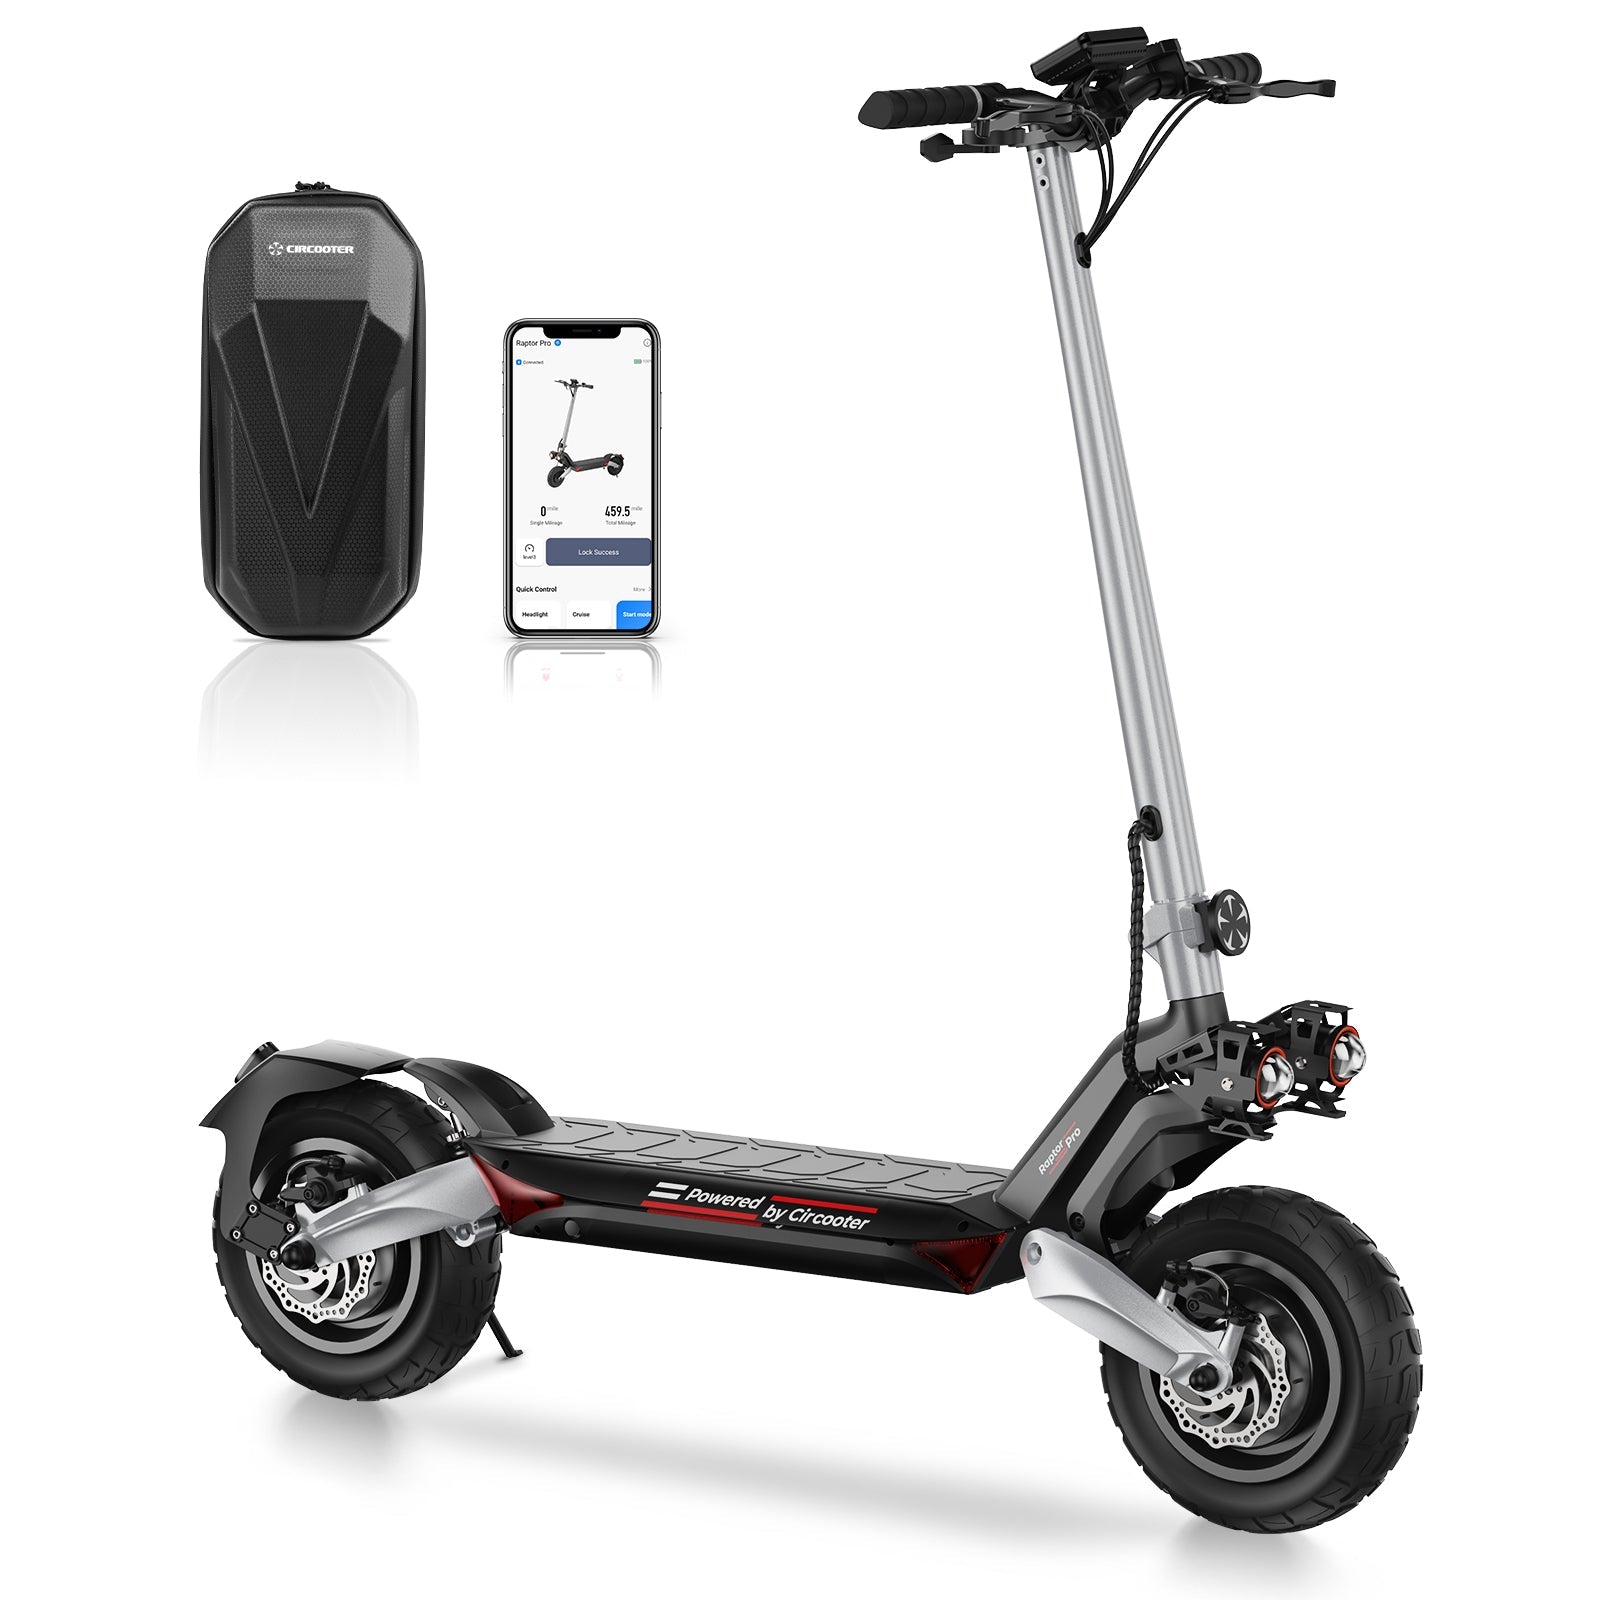 Refurbished Circooter Off Road Electric Scooter(1600W)